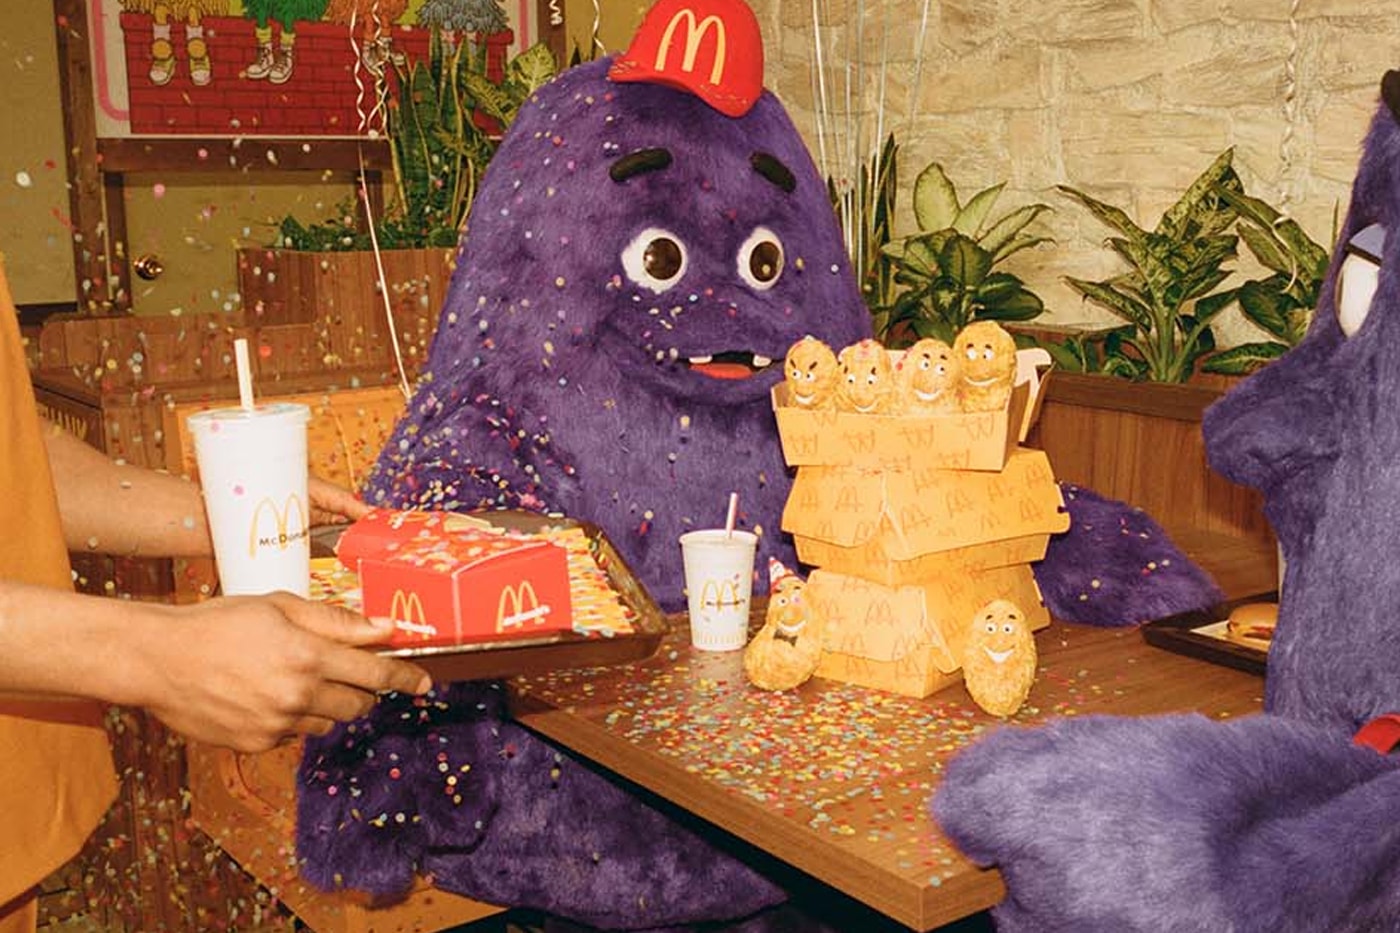 https://image-cdn.hypb.st/https%3A%2F%2Fhypebeast.com%2Fimage%2F2023%2F06%2Fmcdonalds-introduces-grimace-birthday-meal-and-shake-001.jpg?cbr=1&q=90